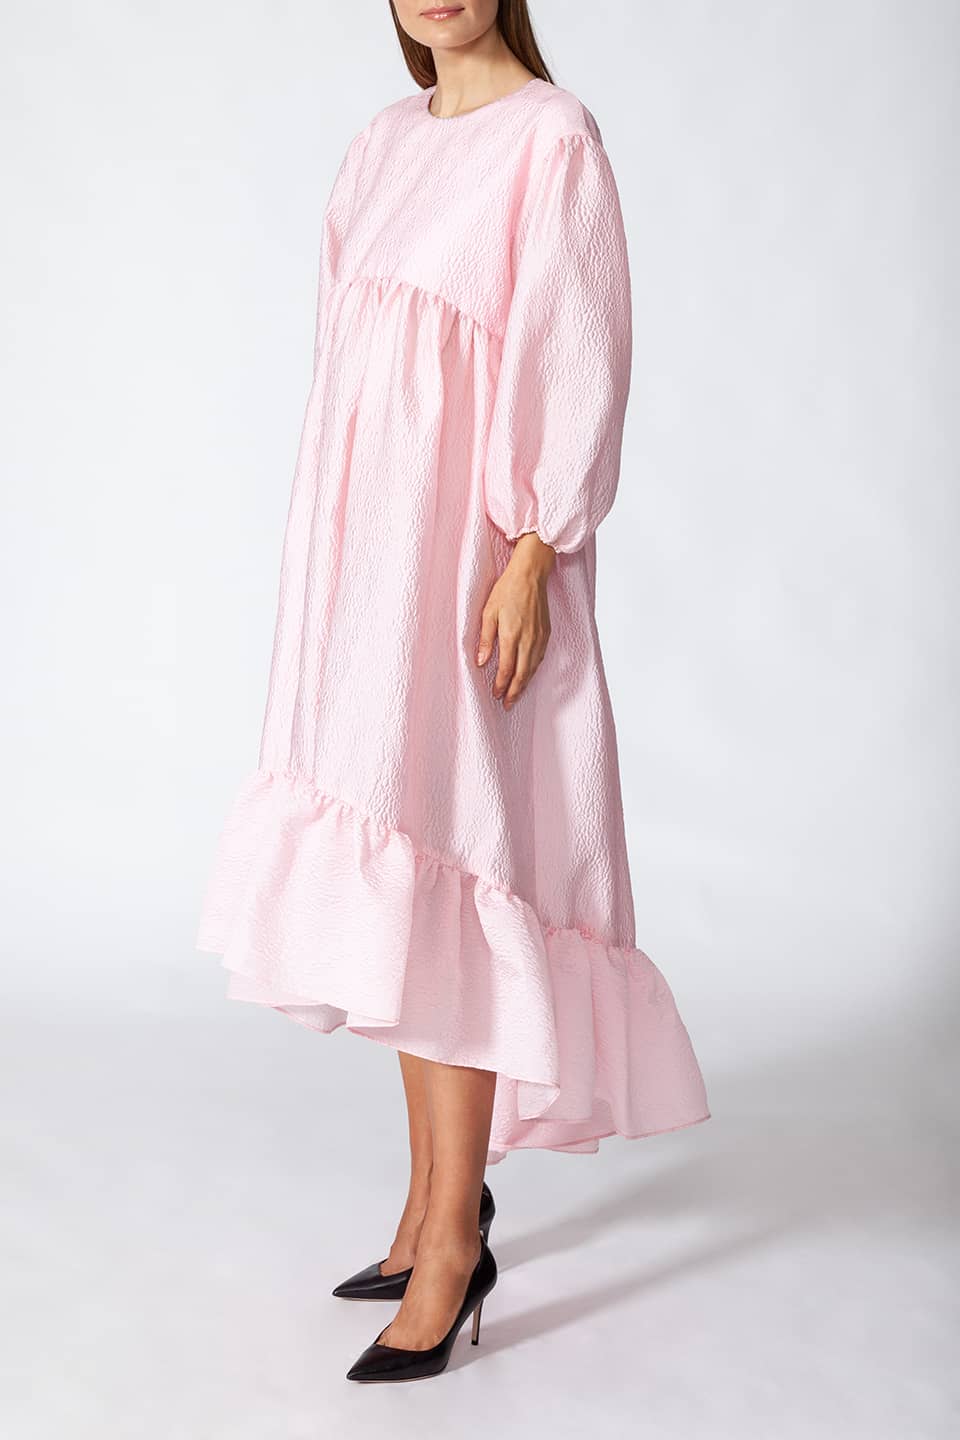 Model in pose from right side wearing Manoush sylist pink long dress with puffy sleeves. Scalloped neck with contrasting stitching.